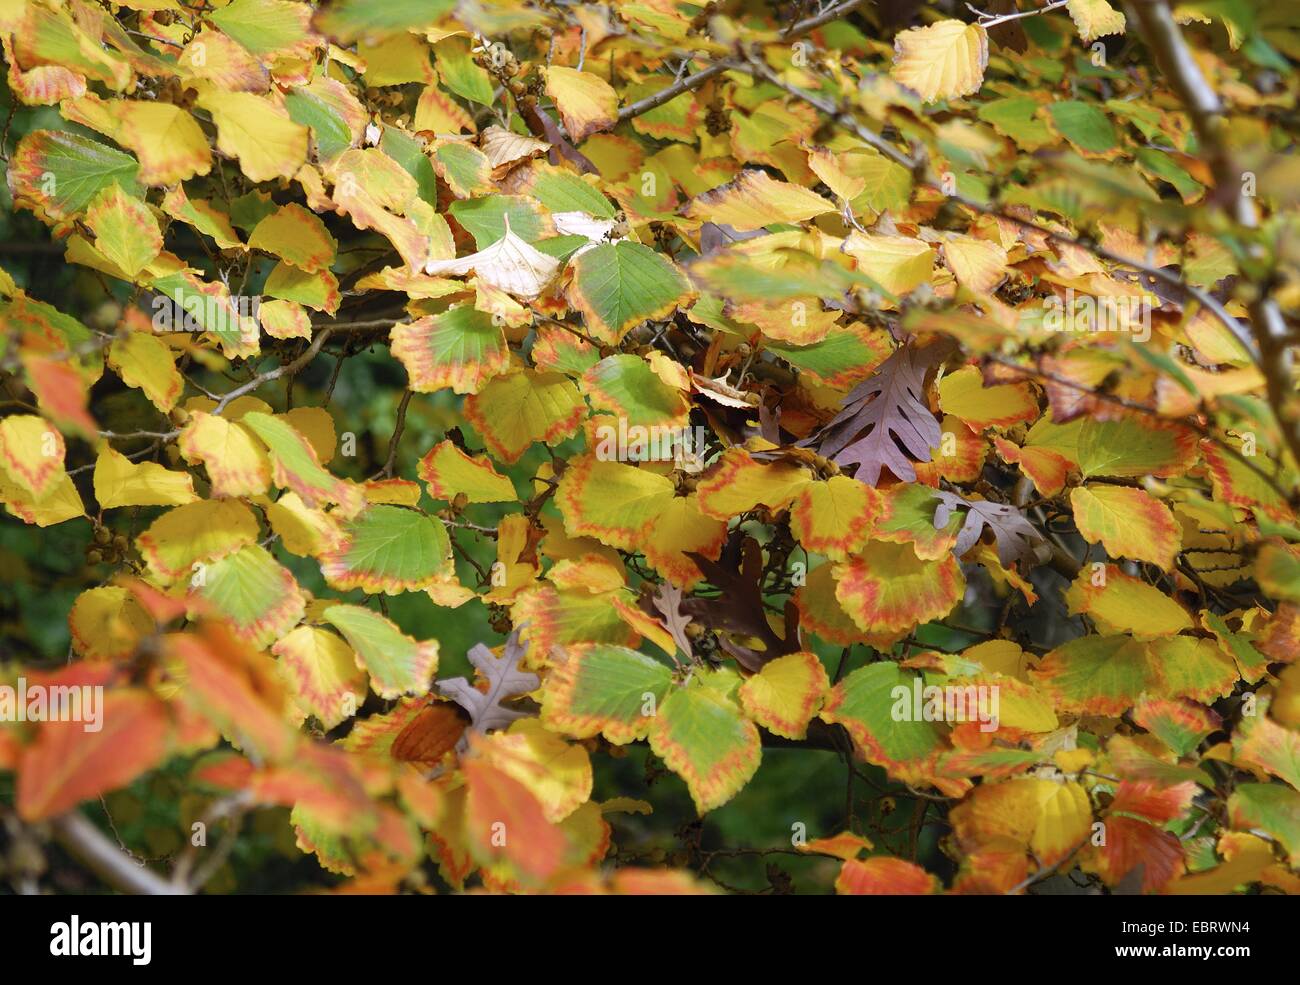 Japanese witch hazel (Hamamelis japonica var. flavopurpurascens, Hamamelis japonica var. flavo-purpurascens), with leaves in autumn Stock Photo